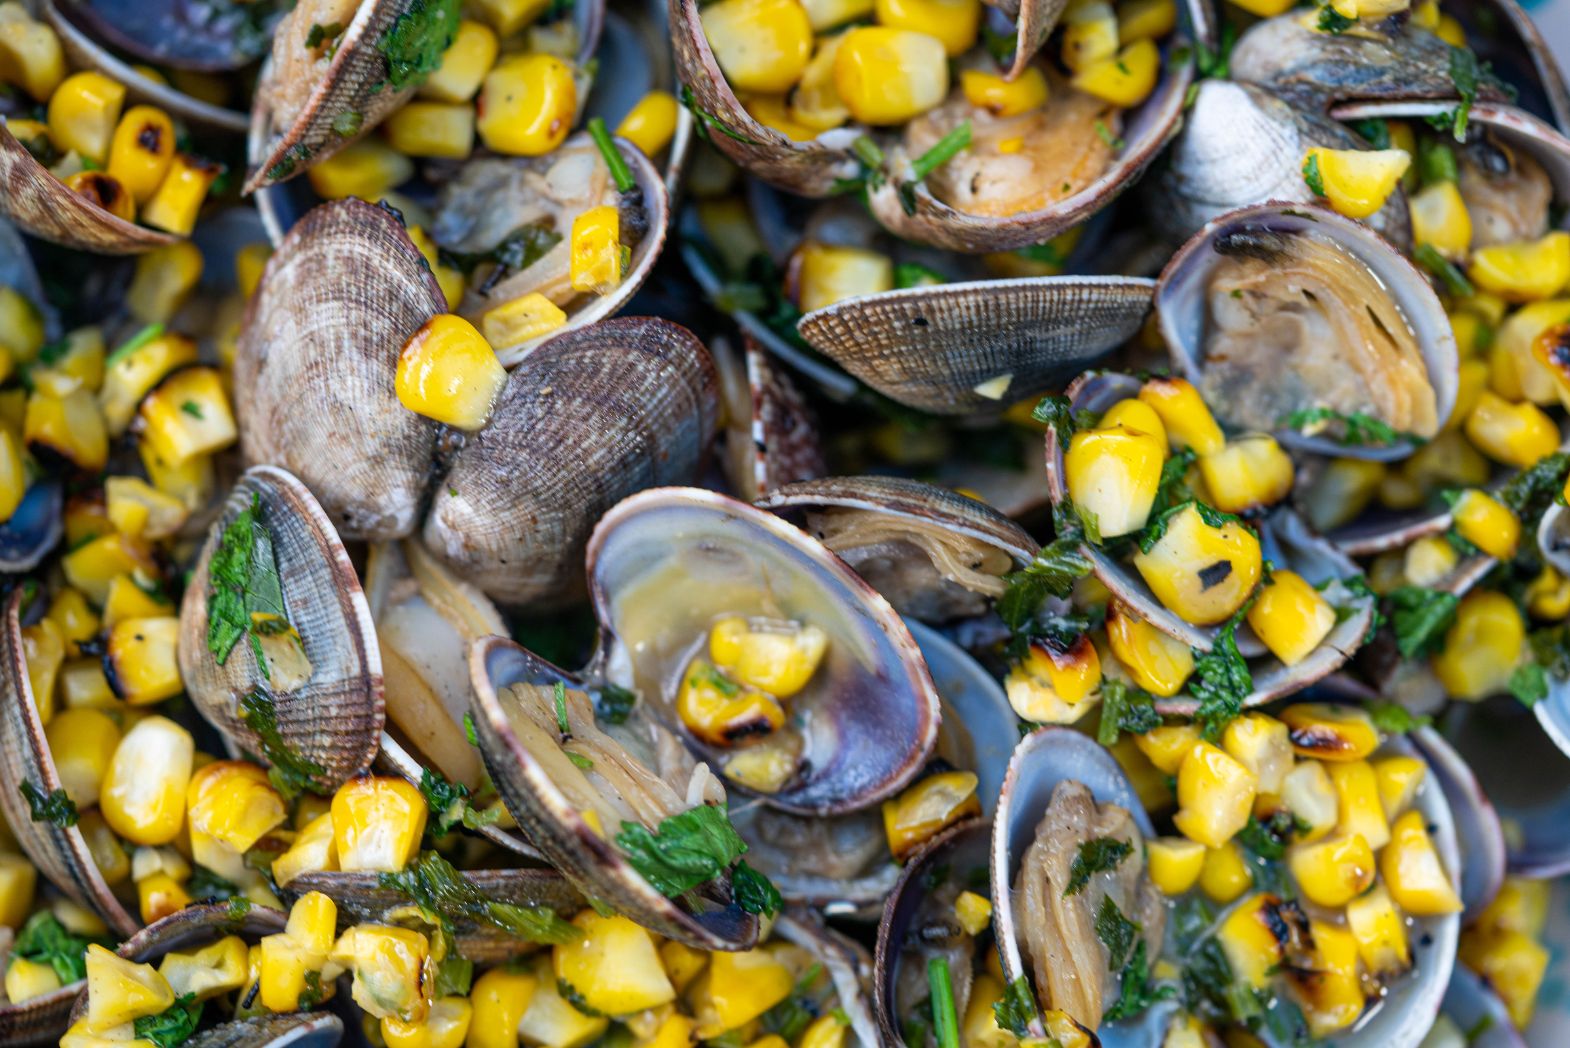 Barbecued Clams With Miso and Sweetcorn